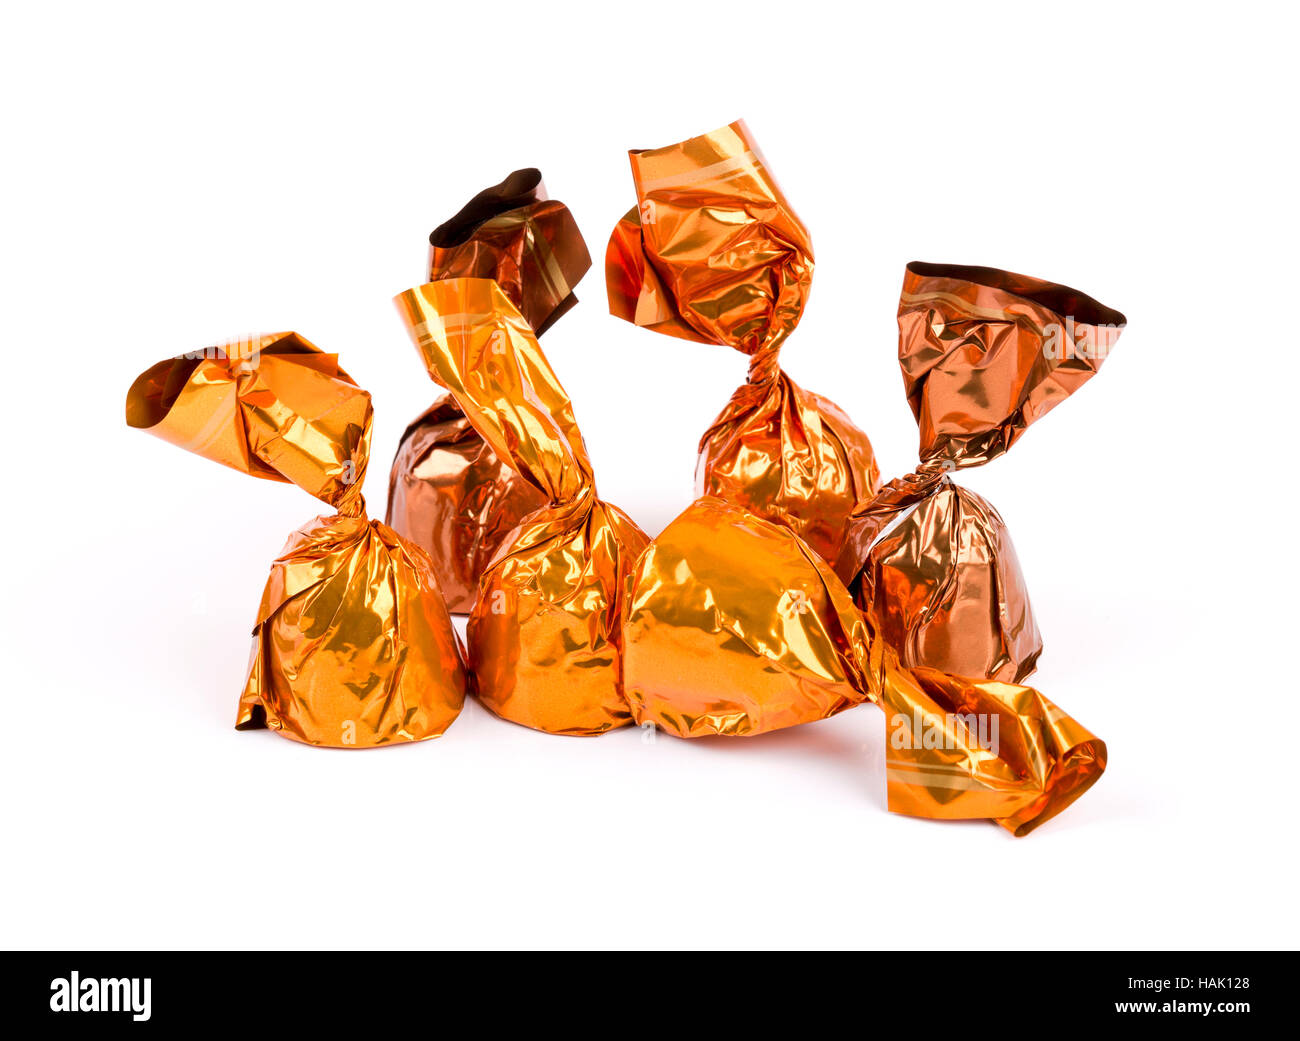 group of chocolate candies wrapped in shiny paper isolated on white Stock Photo